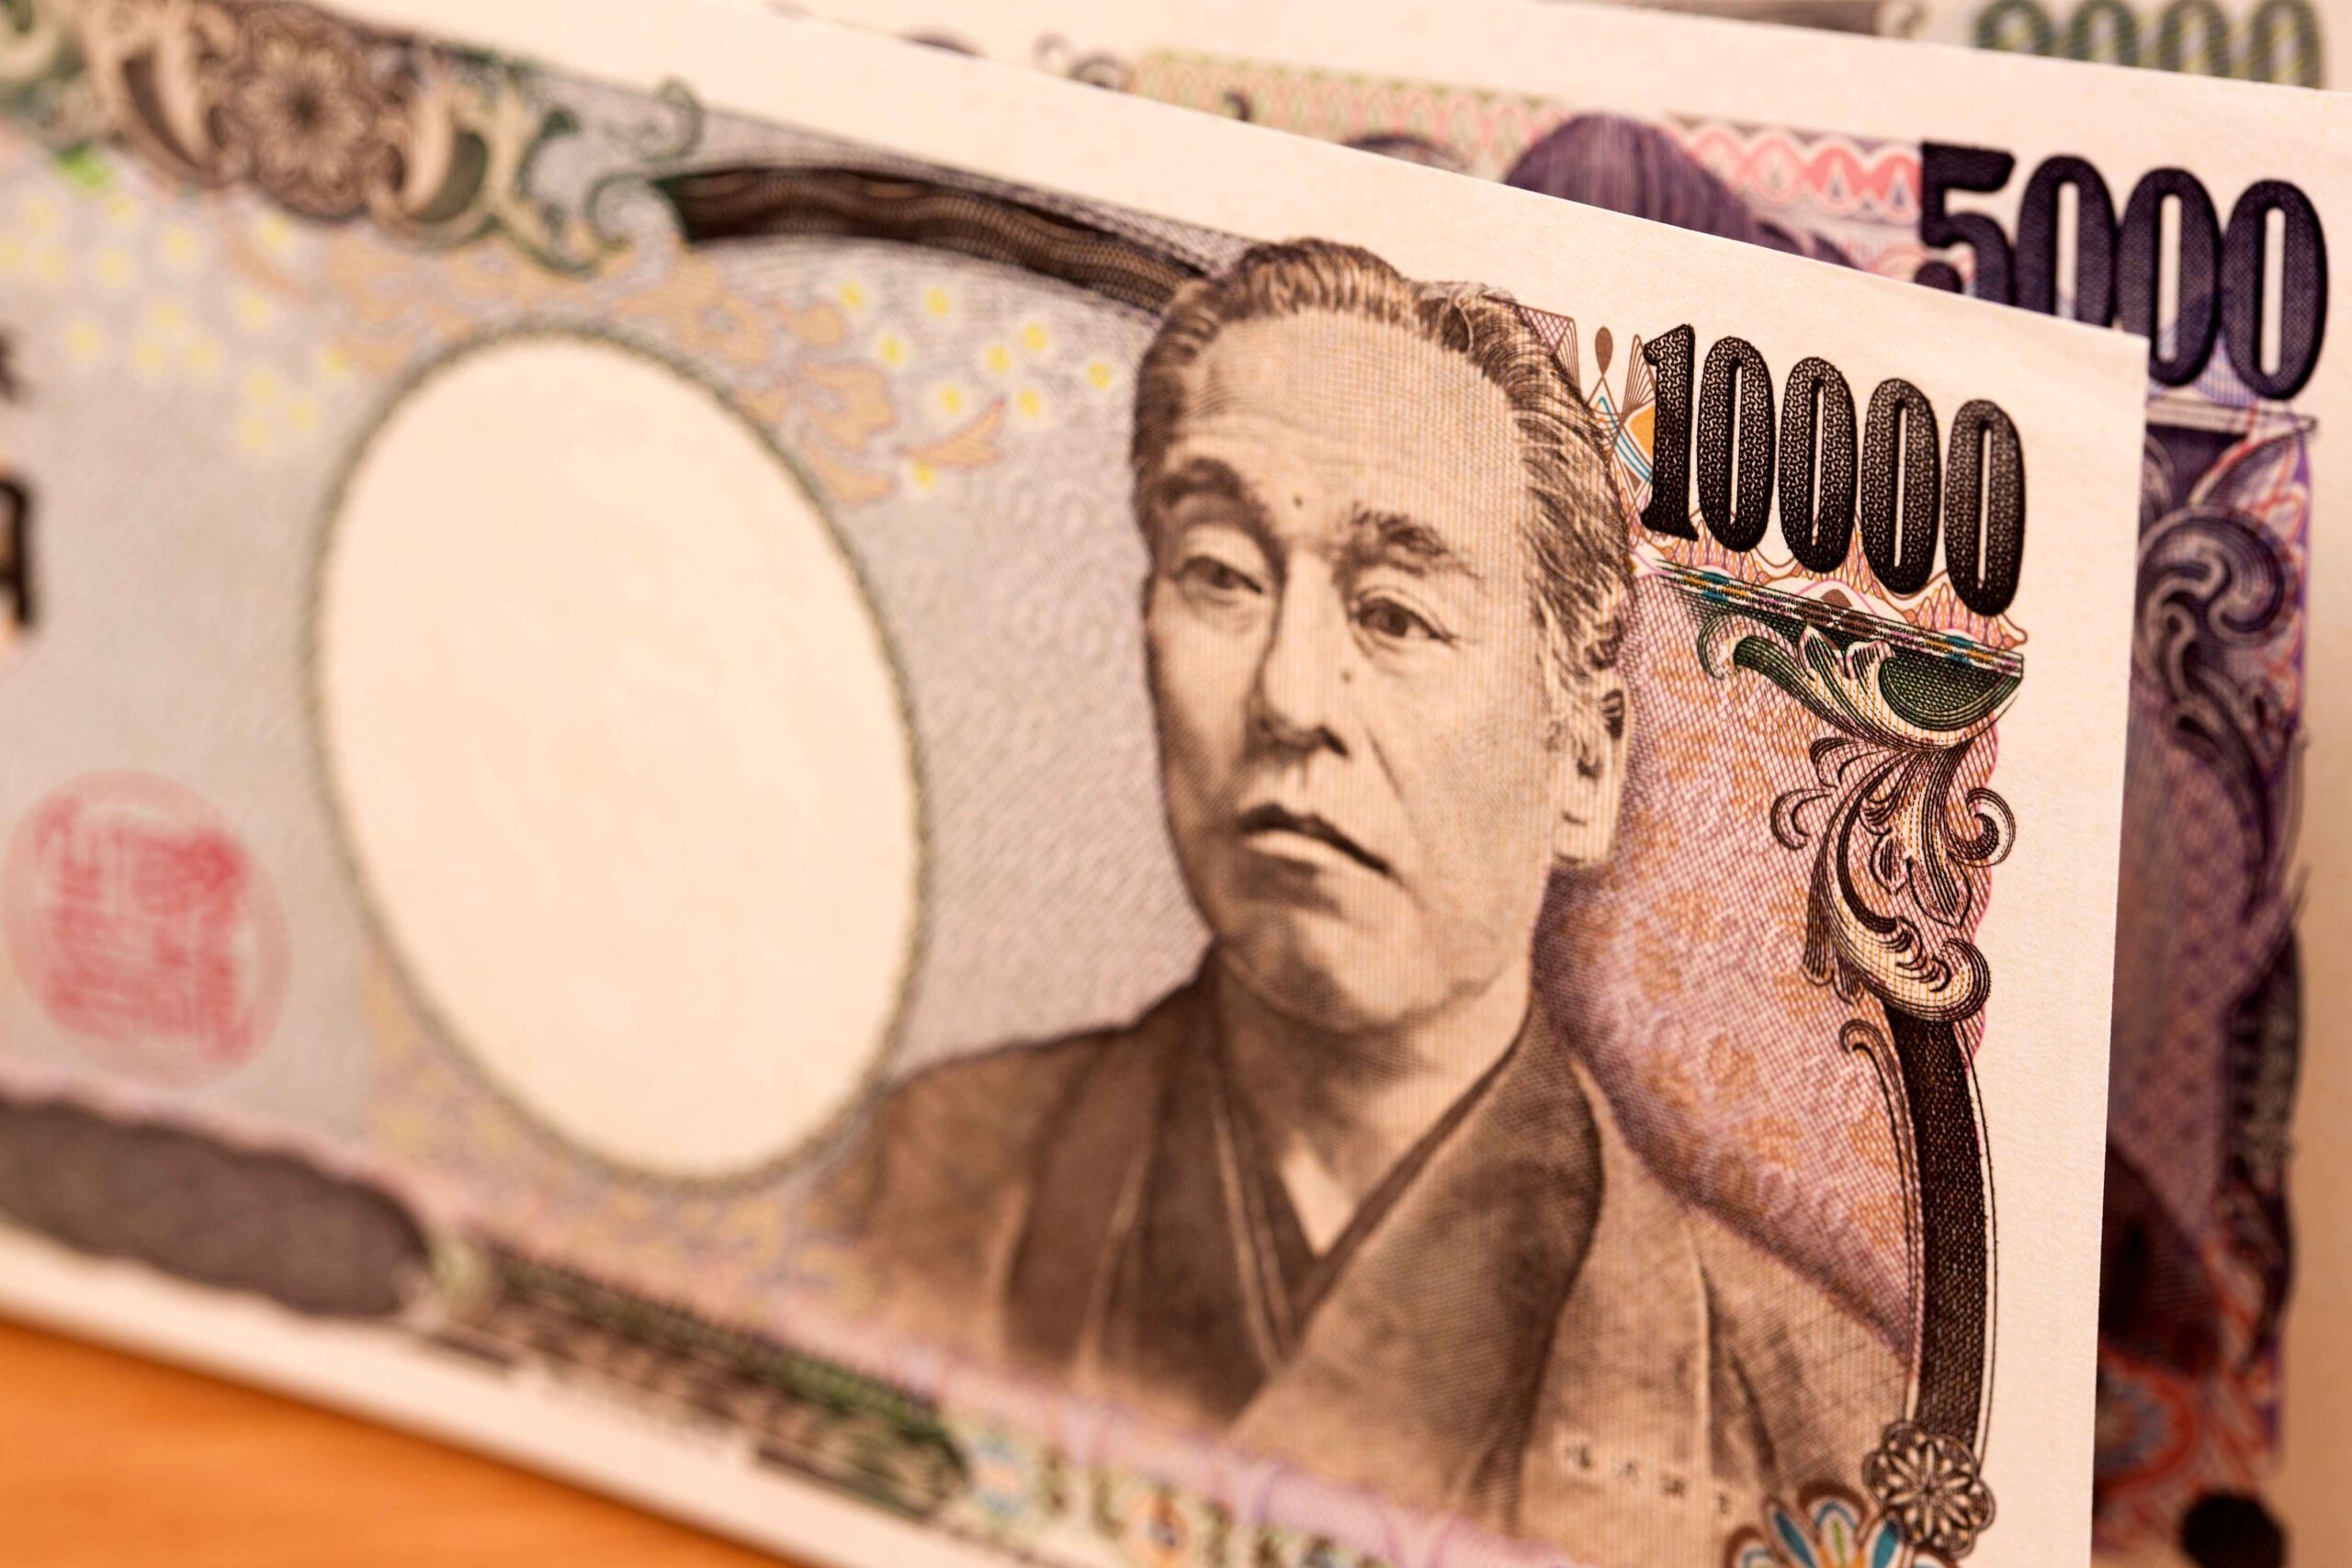 Japanese yen represented in an image.